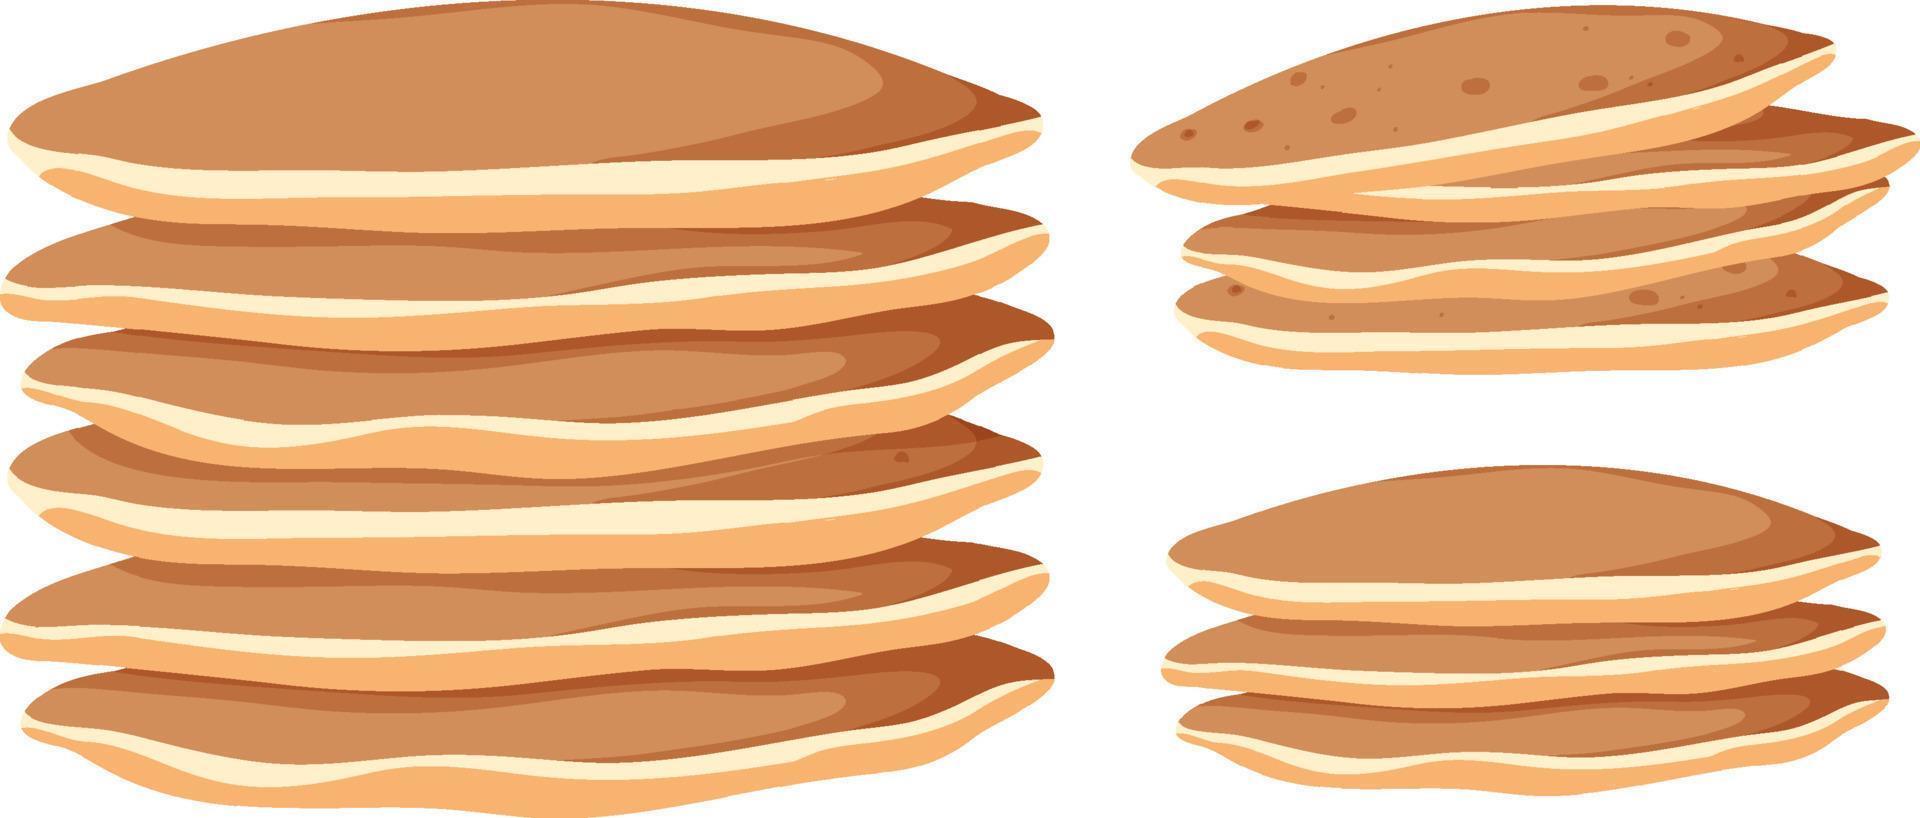 Stack of pancakes in cartoon style vector